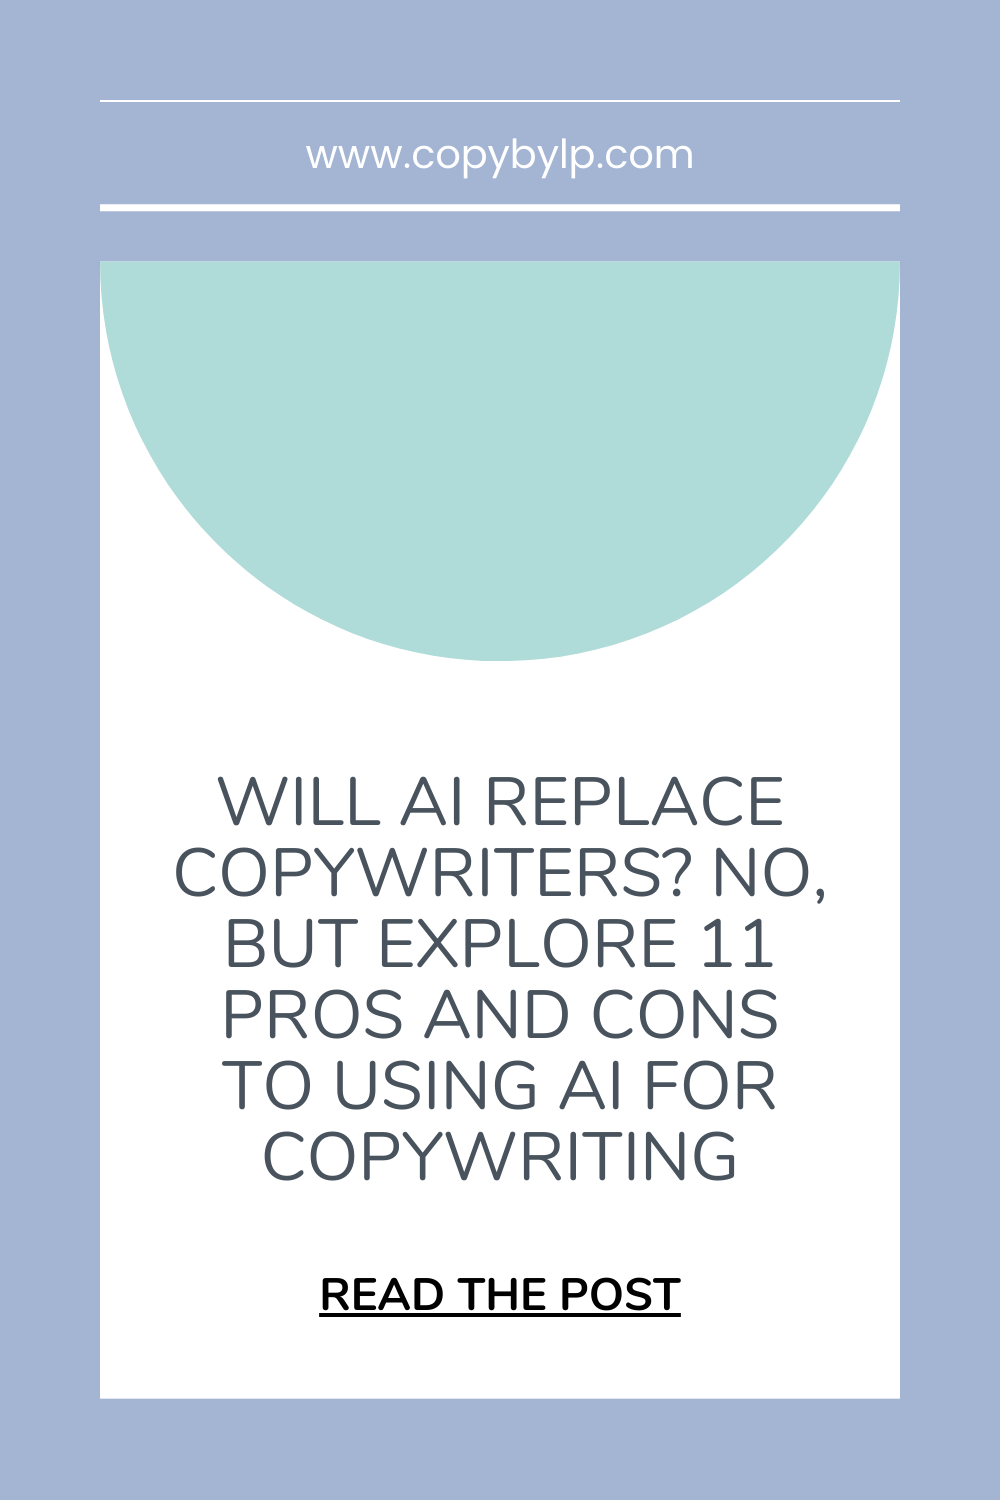 Will AI Replace Copywriters? No, But Explore 11 Pros and Cons To Using AI for Copywriting